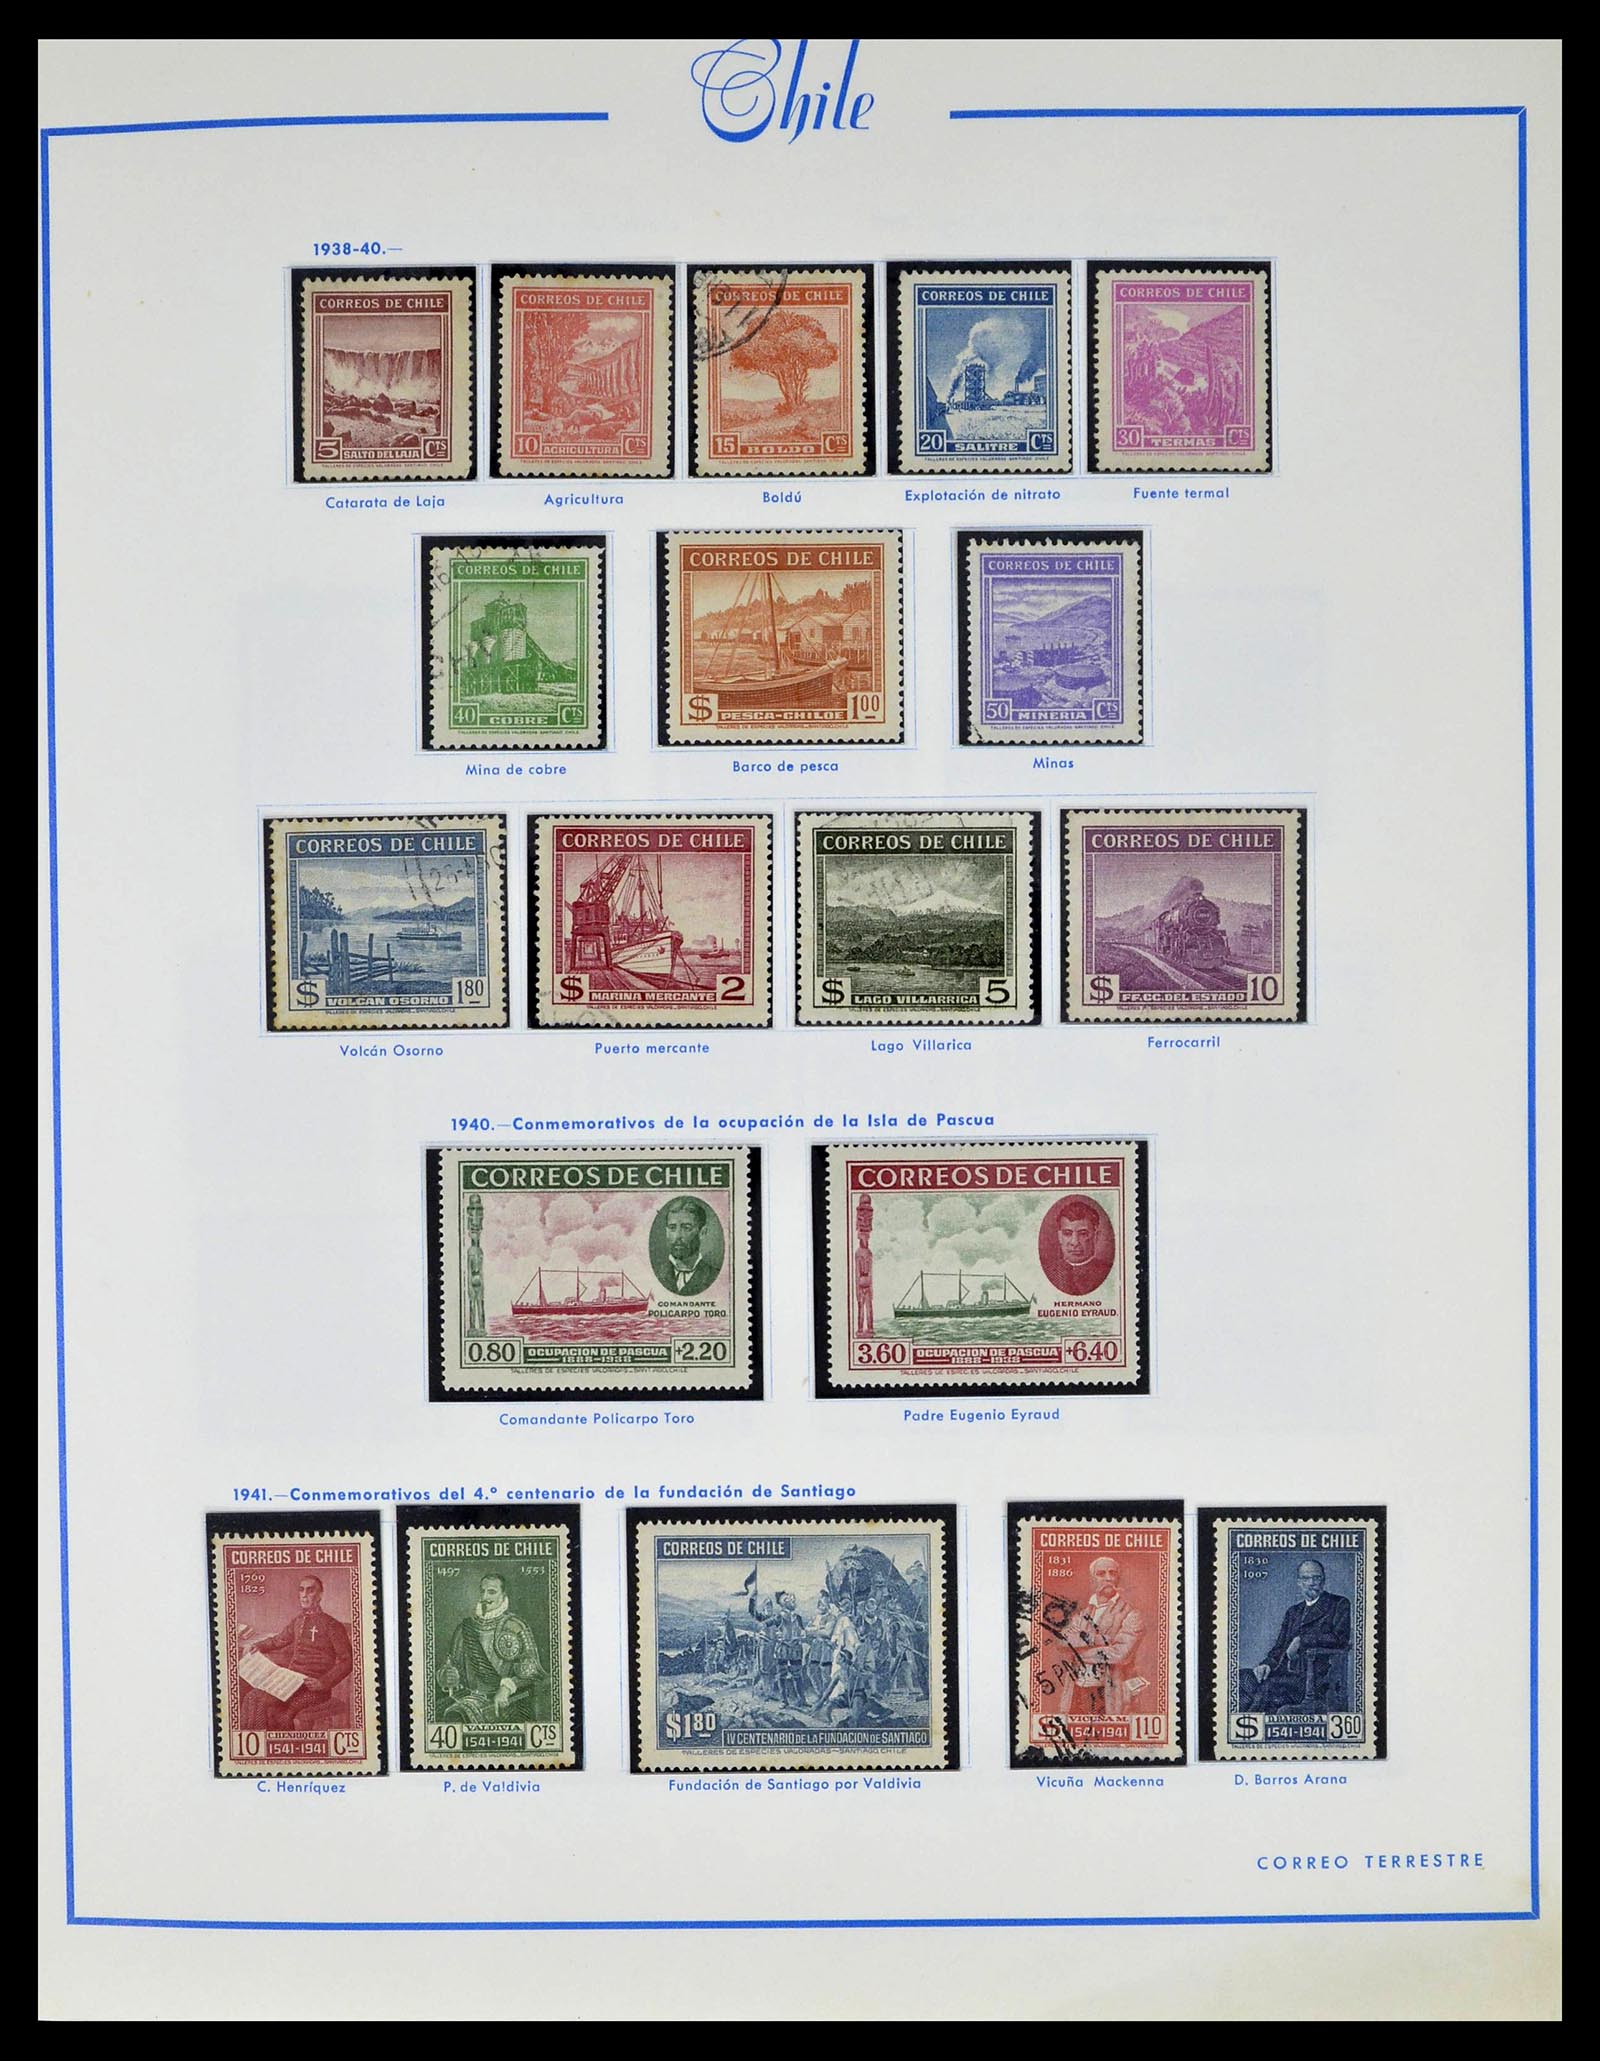 39213 0011 - Stamp collection 39213 Chile 1853-1970.